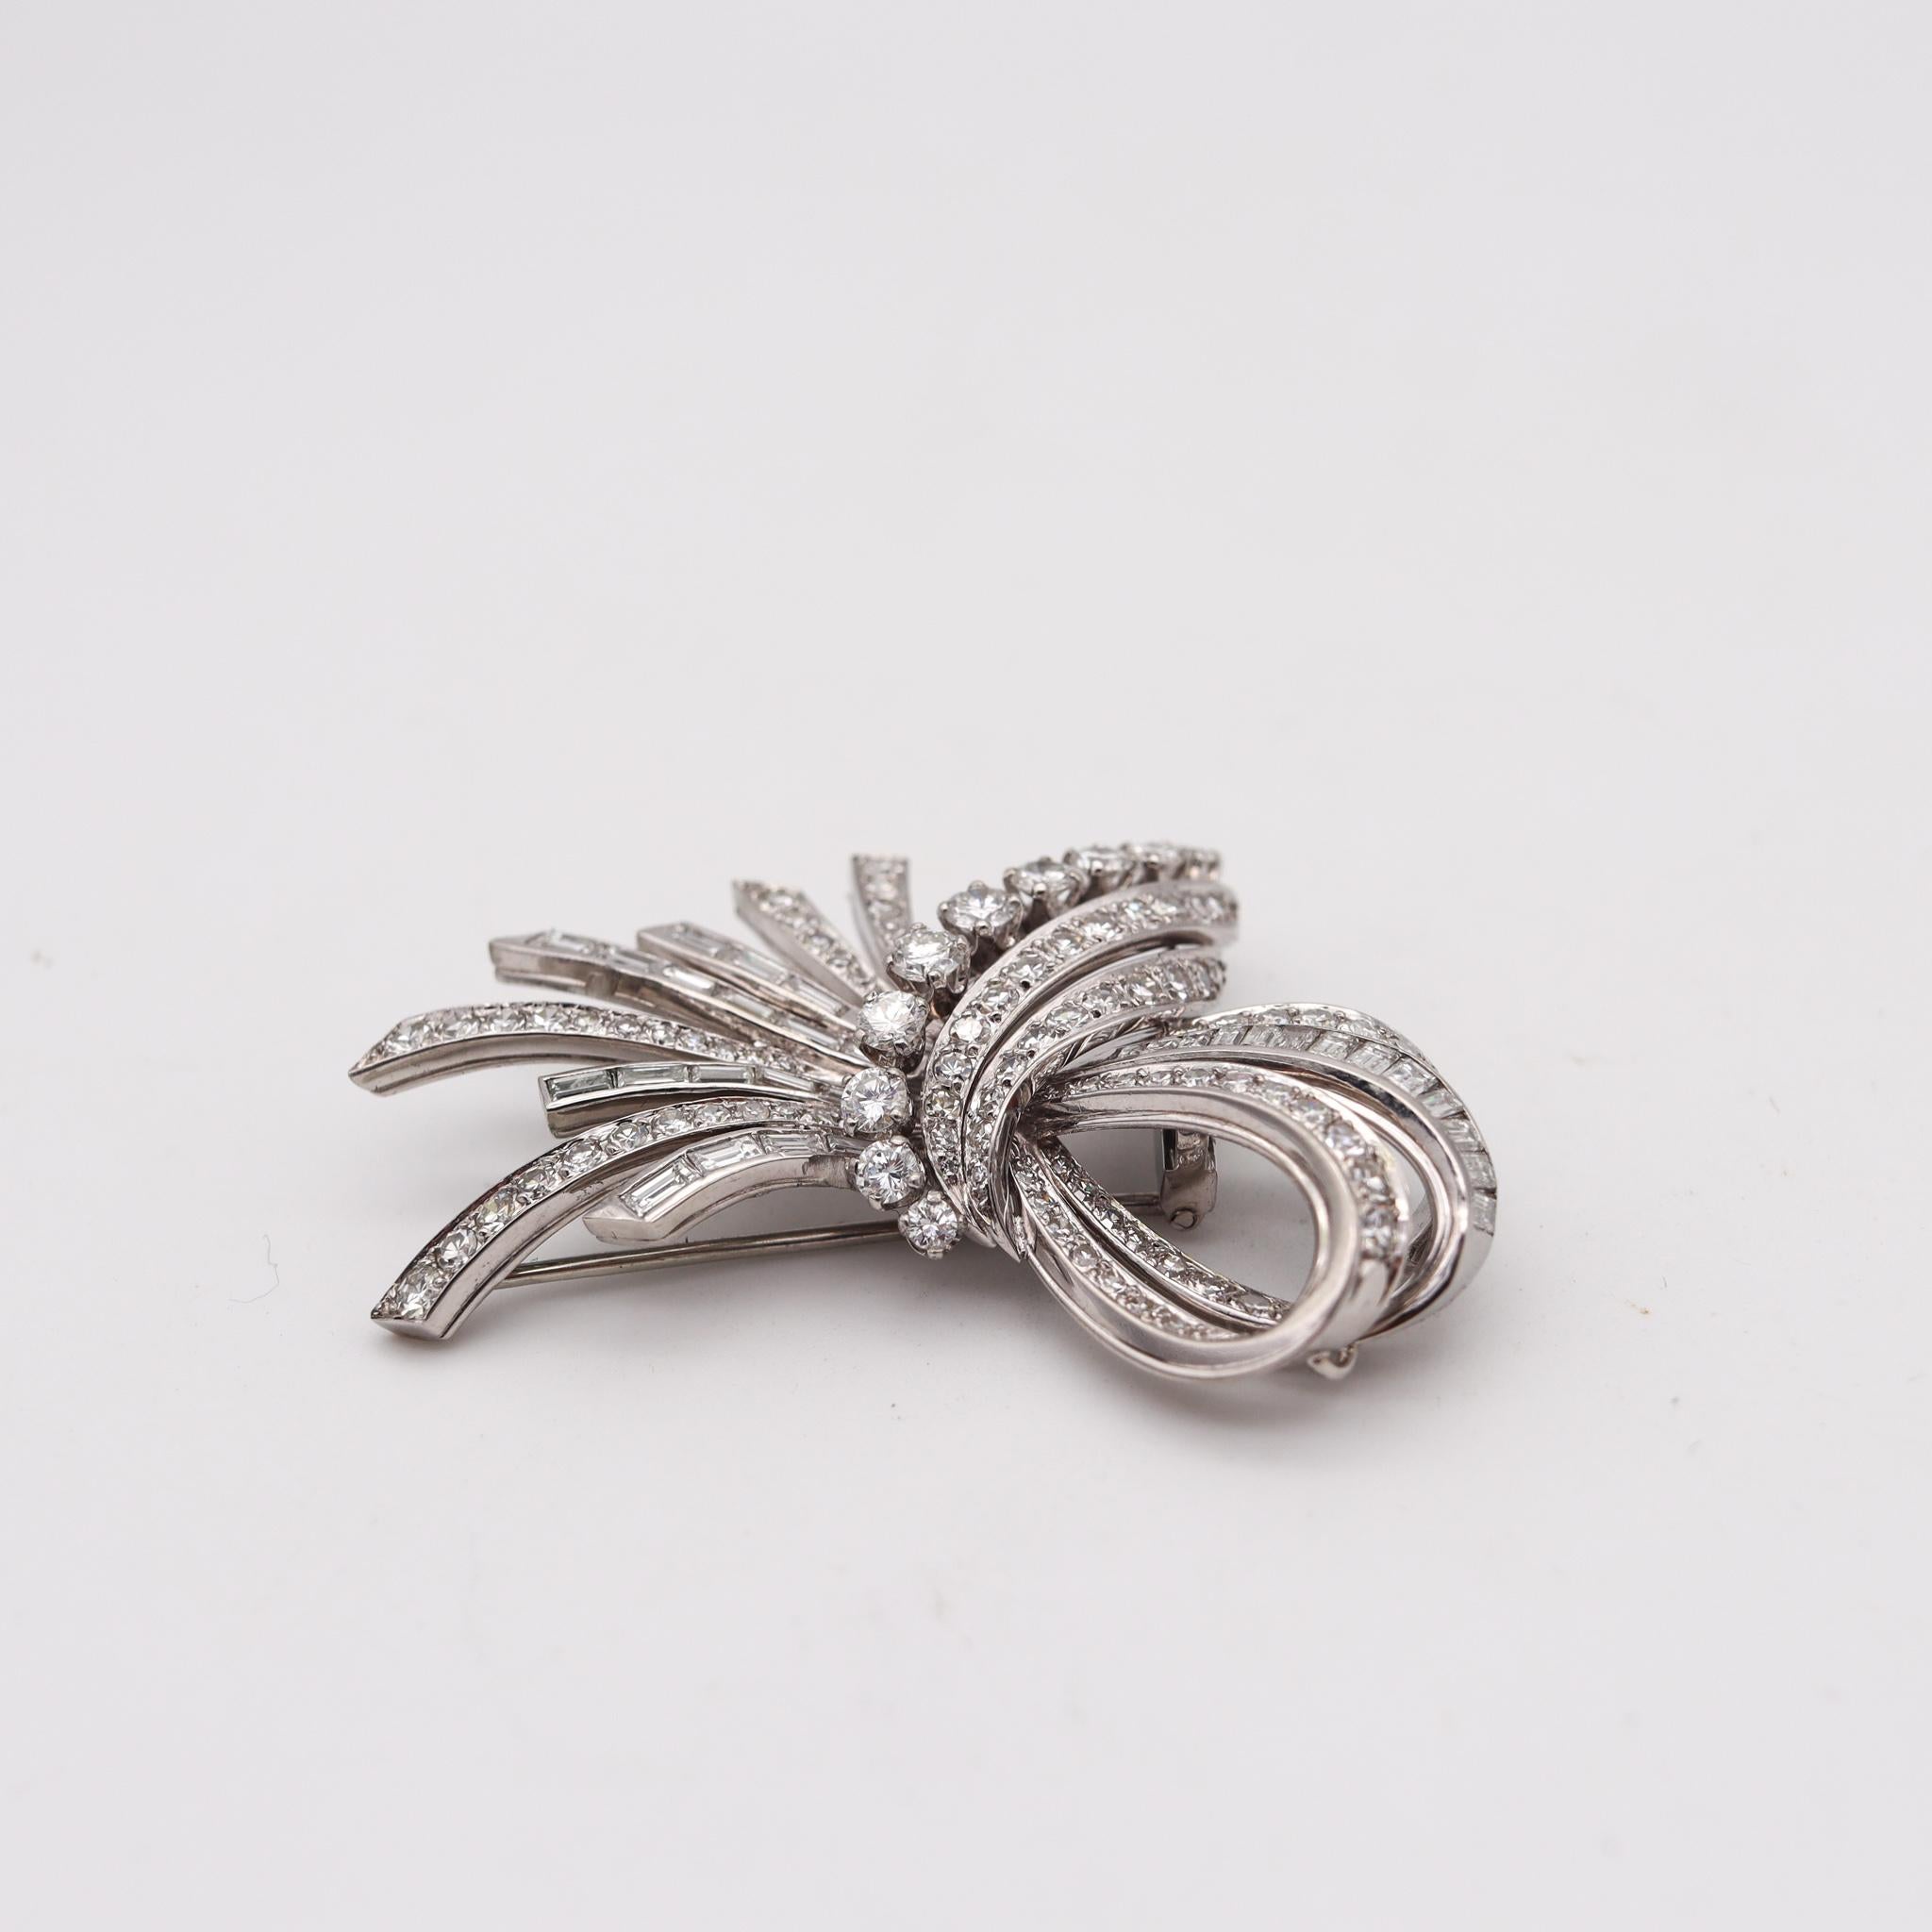 An exceptional brooch designed by Gubelin.

Beautiful and elegant piece, created in Zurich Switzerland by the famous jewelry house of Gubelin during the post war period, circa 1950. This stunning one of a kind rare brooch has been crafted in solid